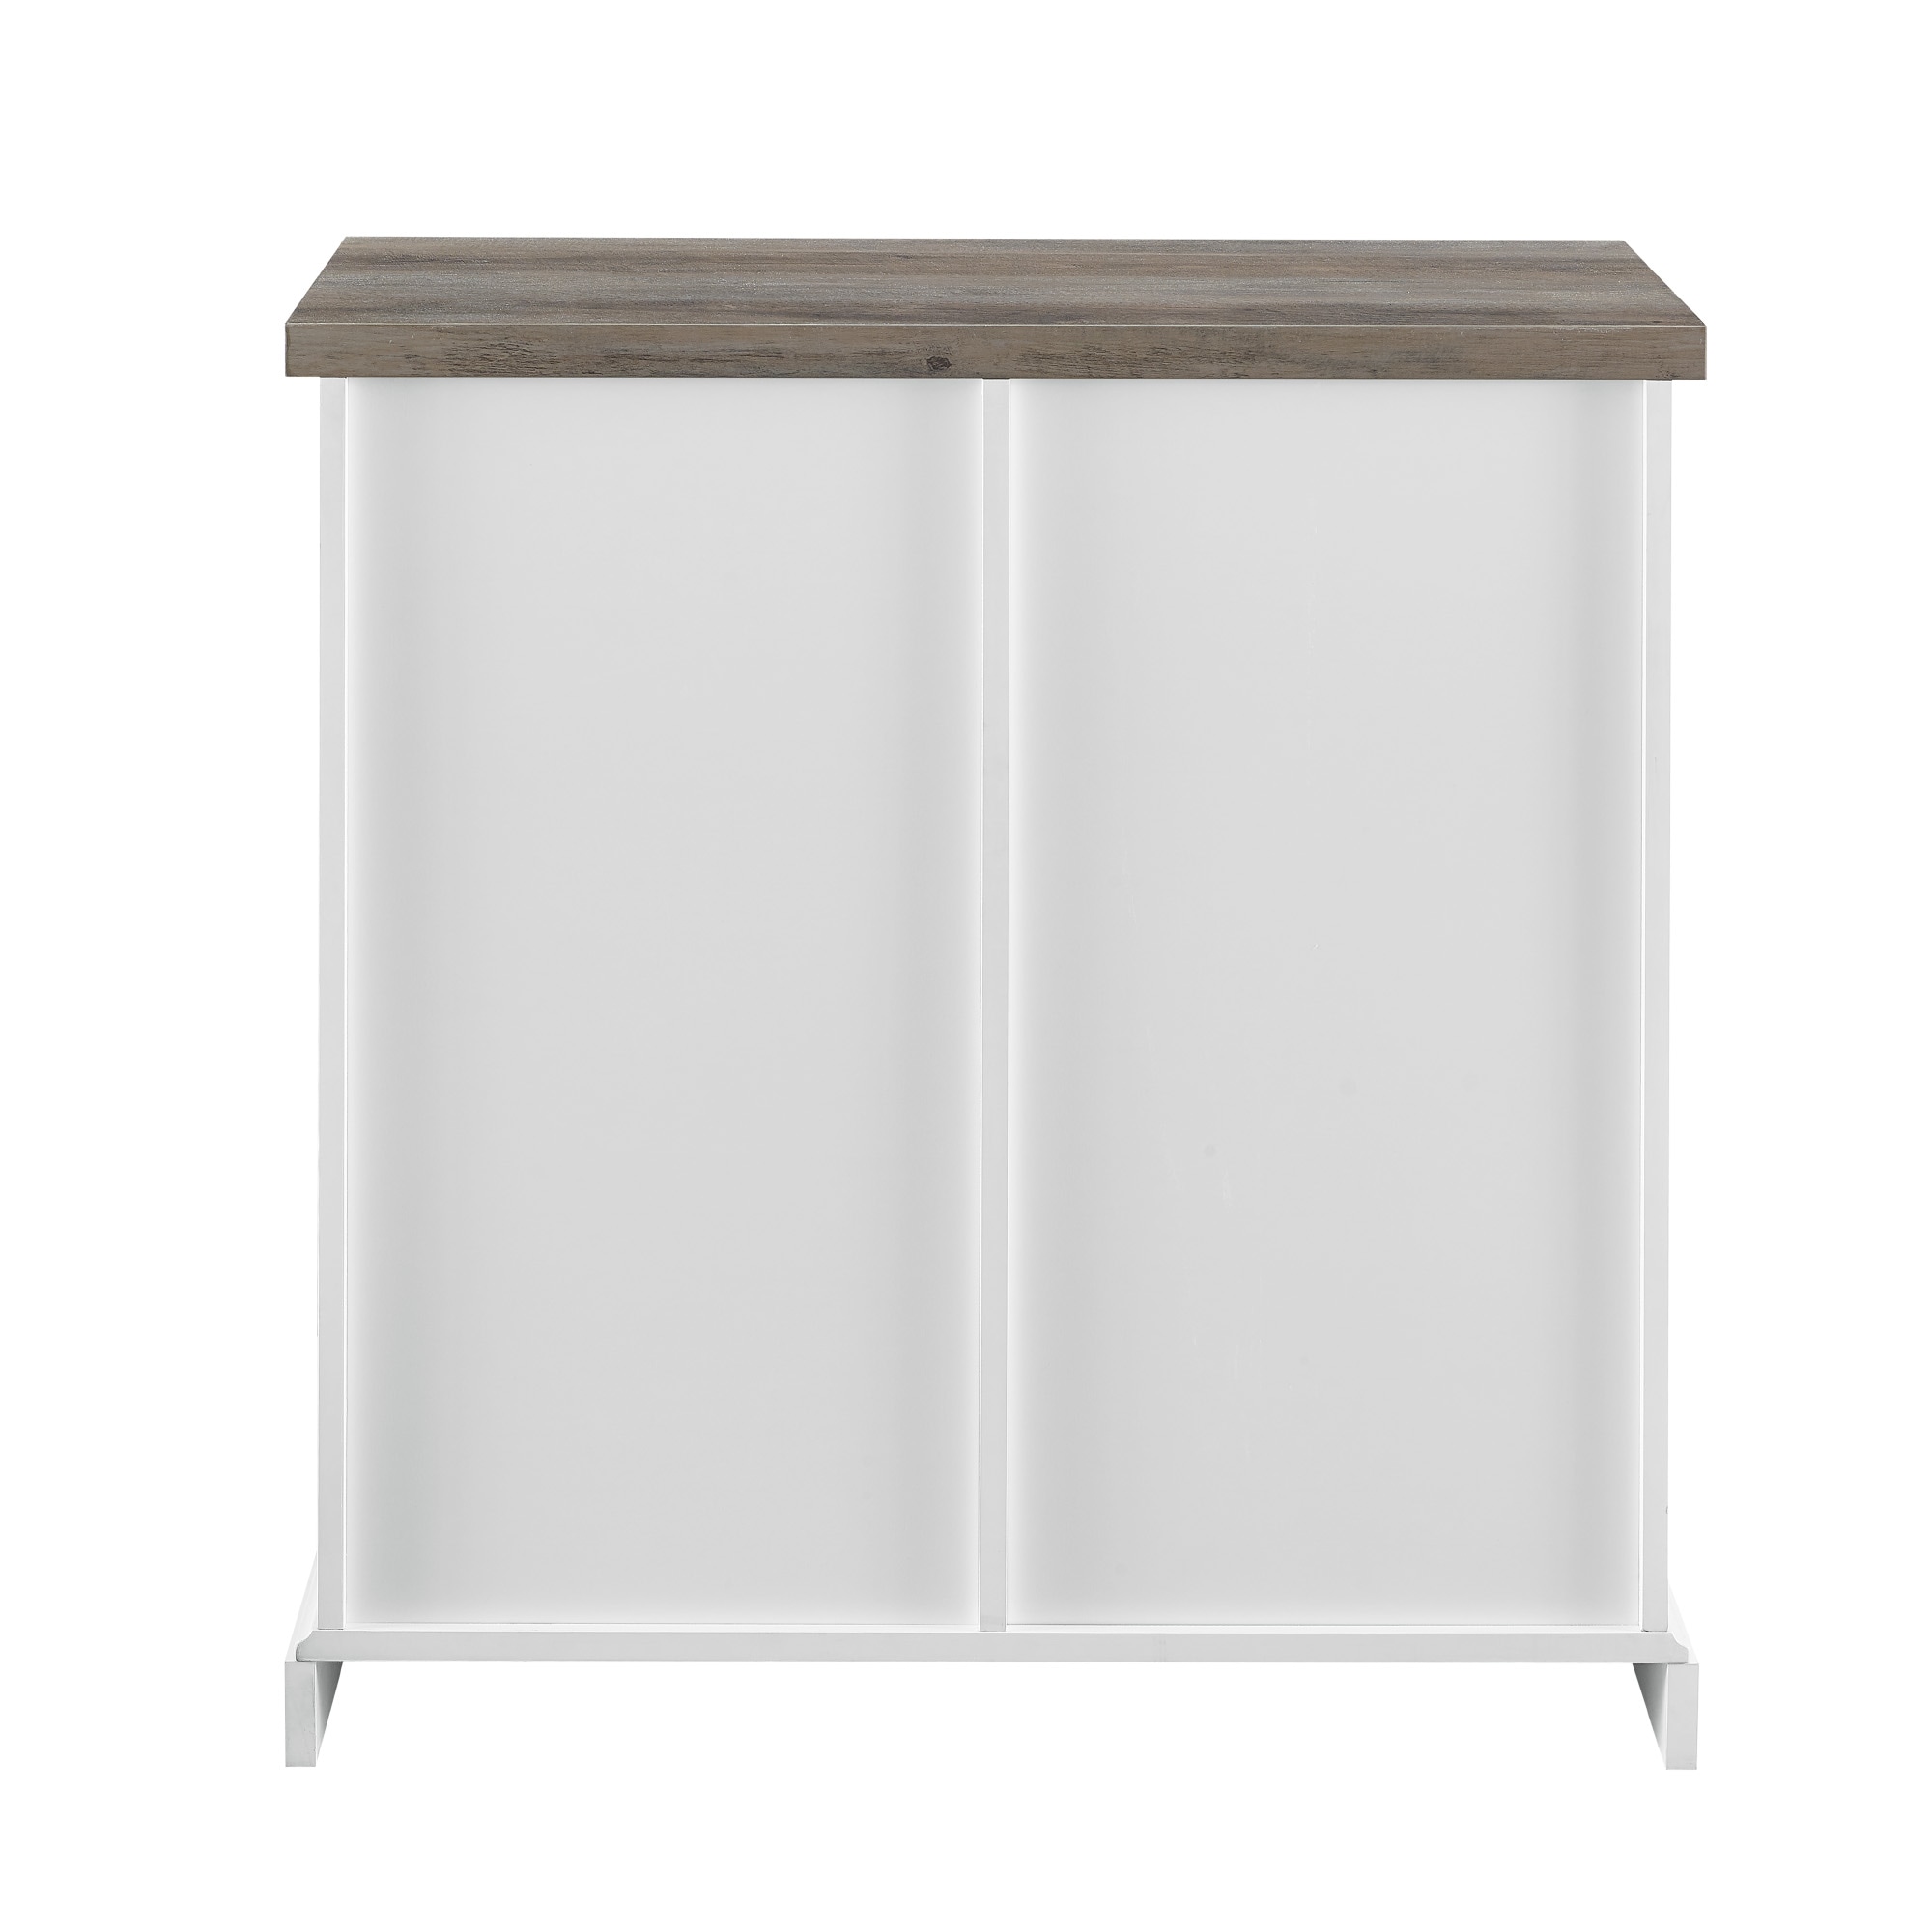 Walker Edison Farmhouse Grey Wash Console Table at Lowes.com